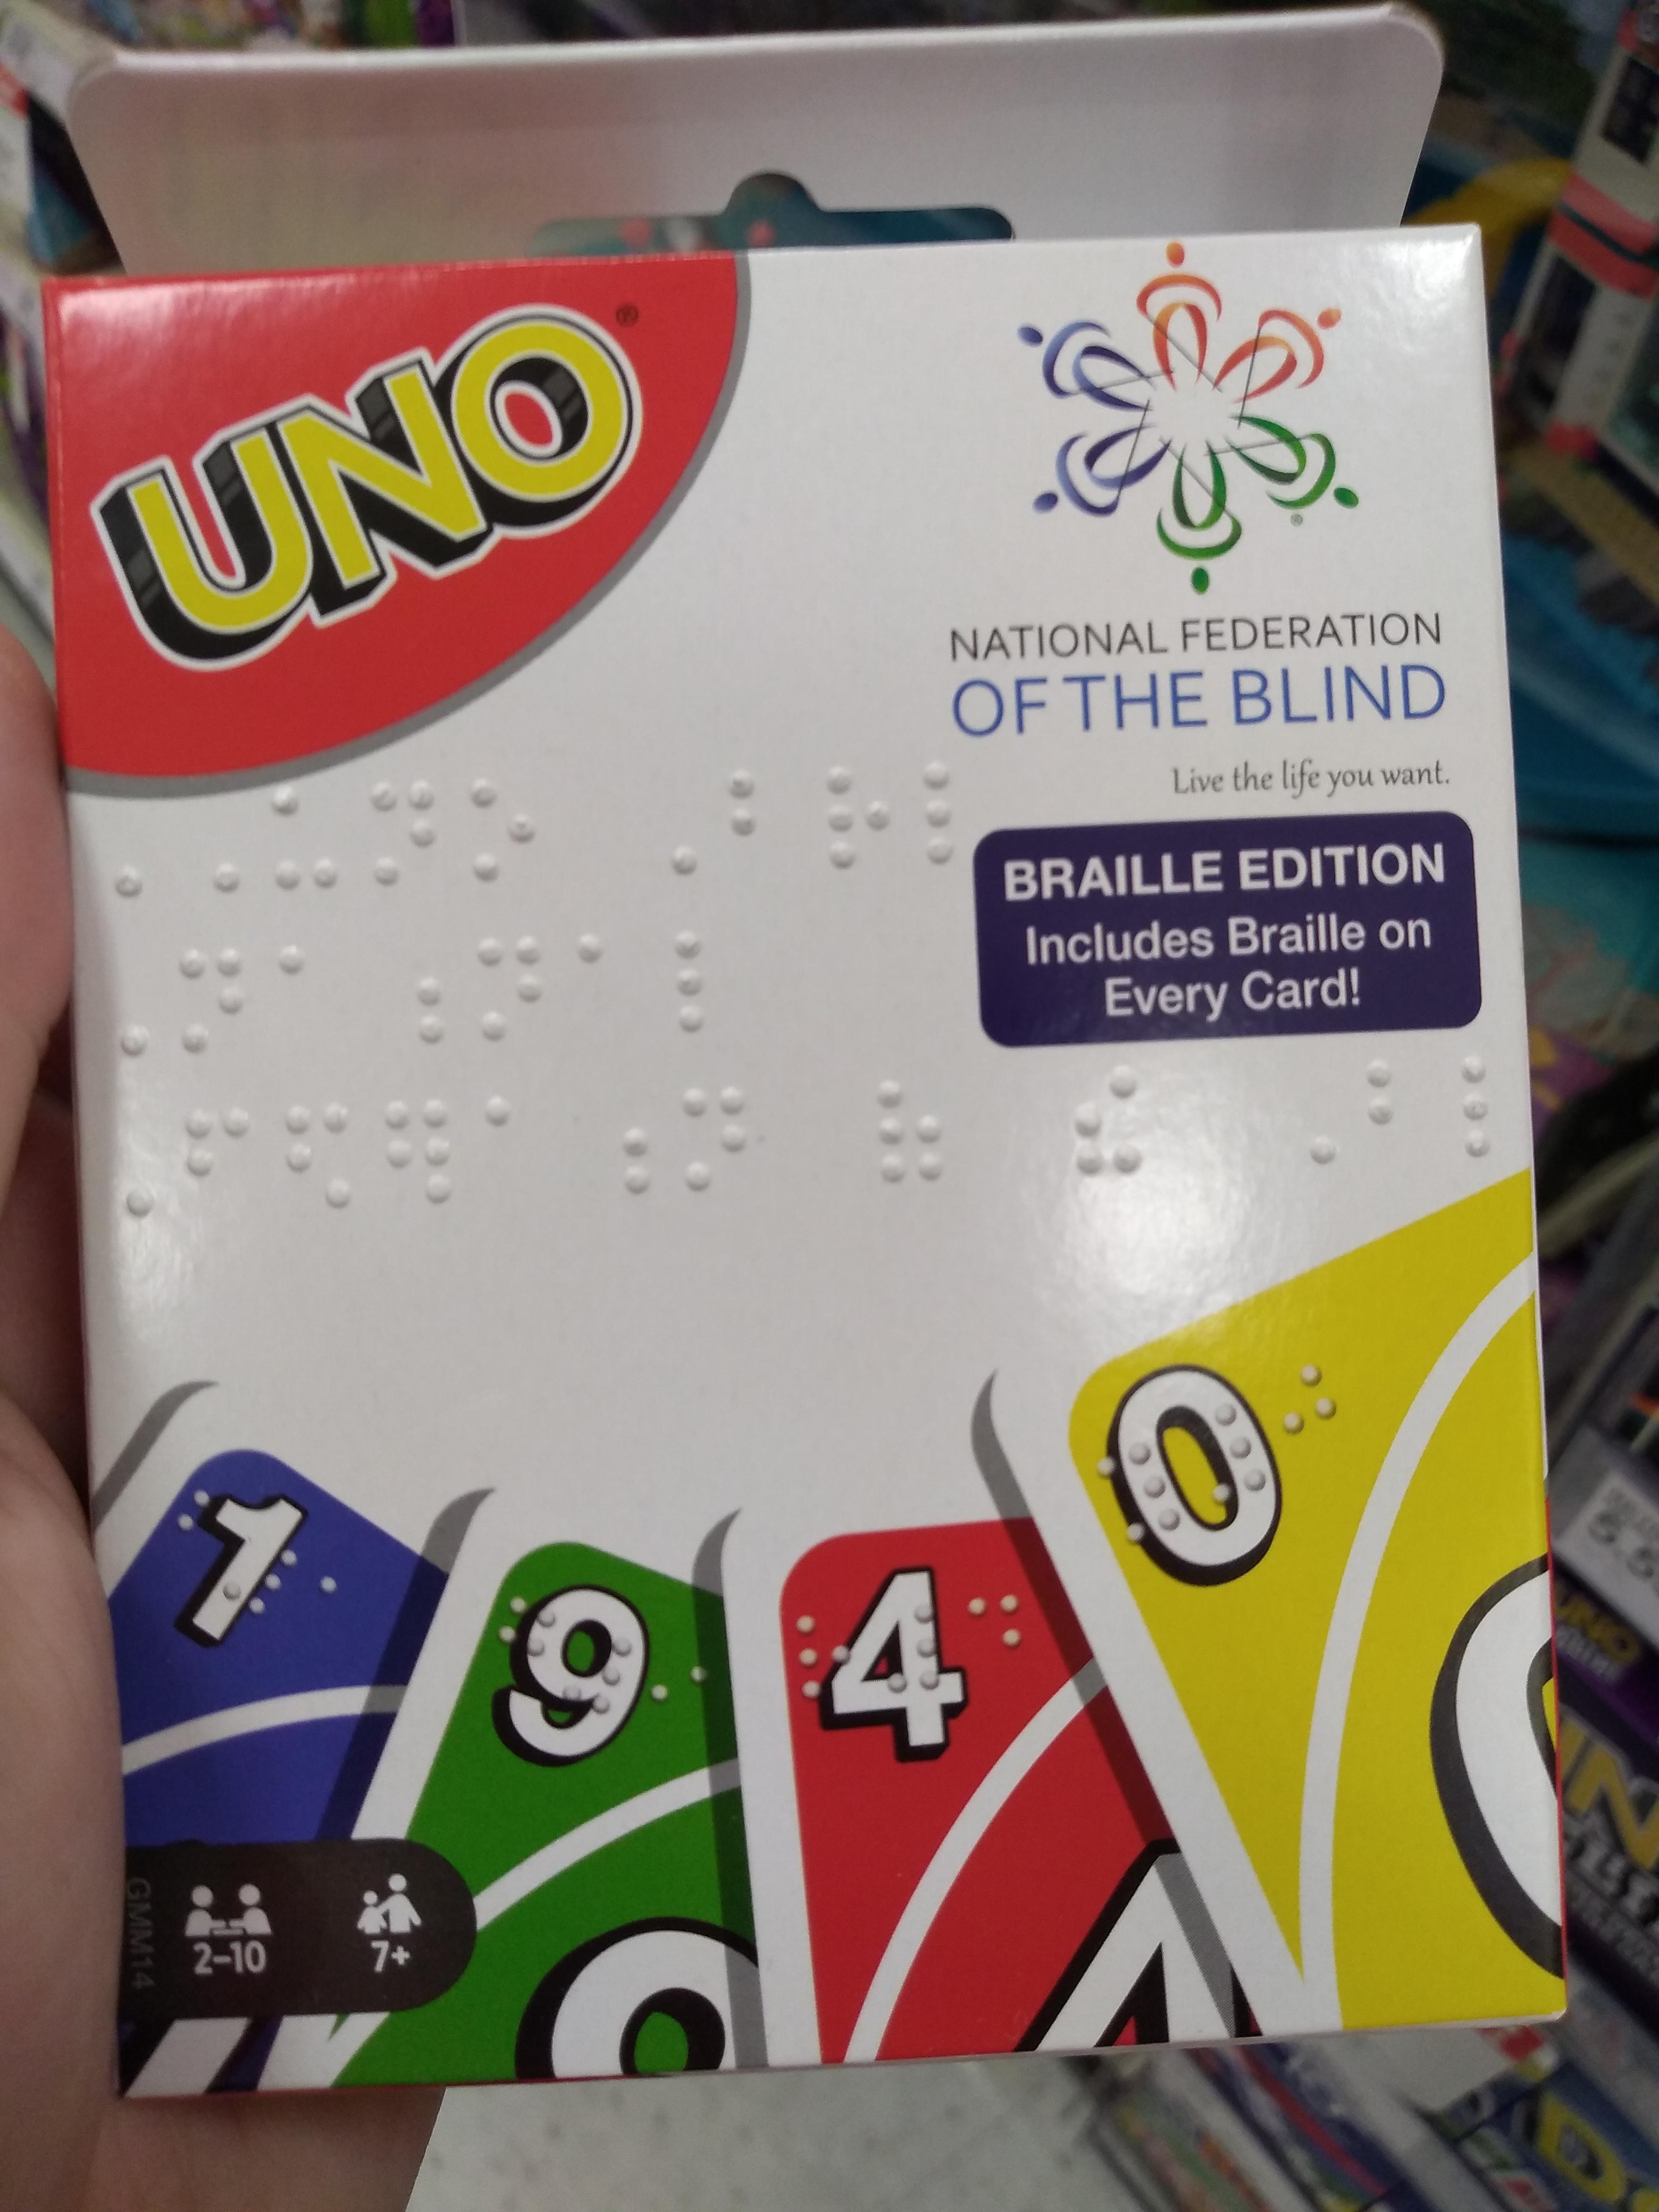 In case you haven't seen this already - A Braille edition of Uno.